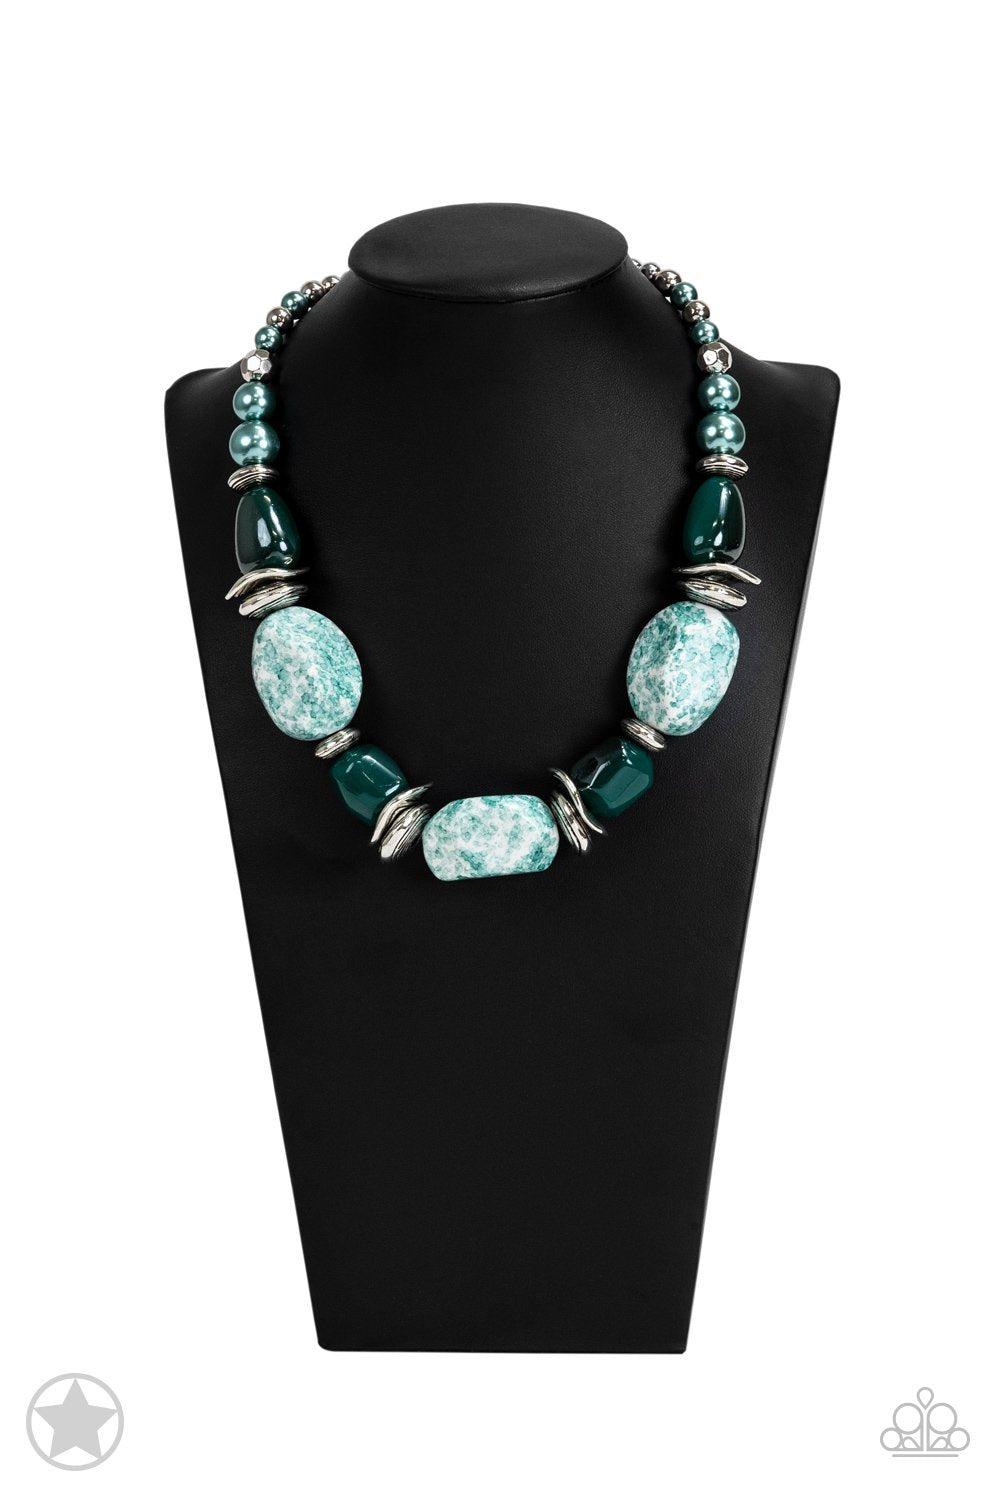 In Good Glazes Chunky Blue Necklace and matching Earrings - Paparazzi Accessories- on bust -CarasShop.com - $5 Jewelry by Cara Jewels